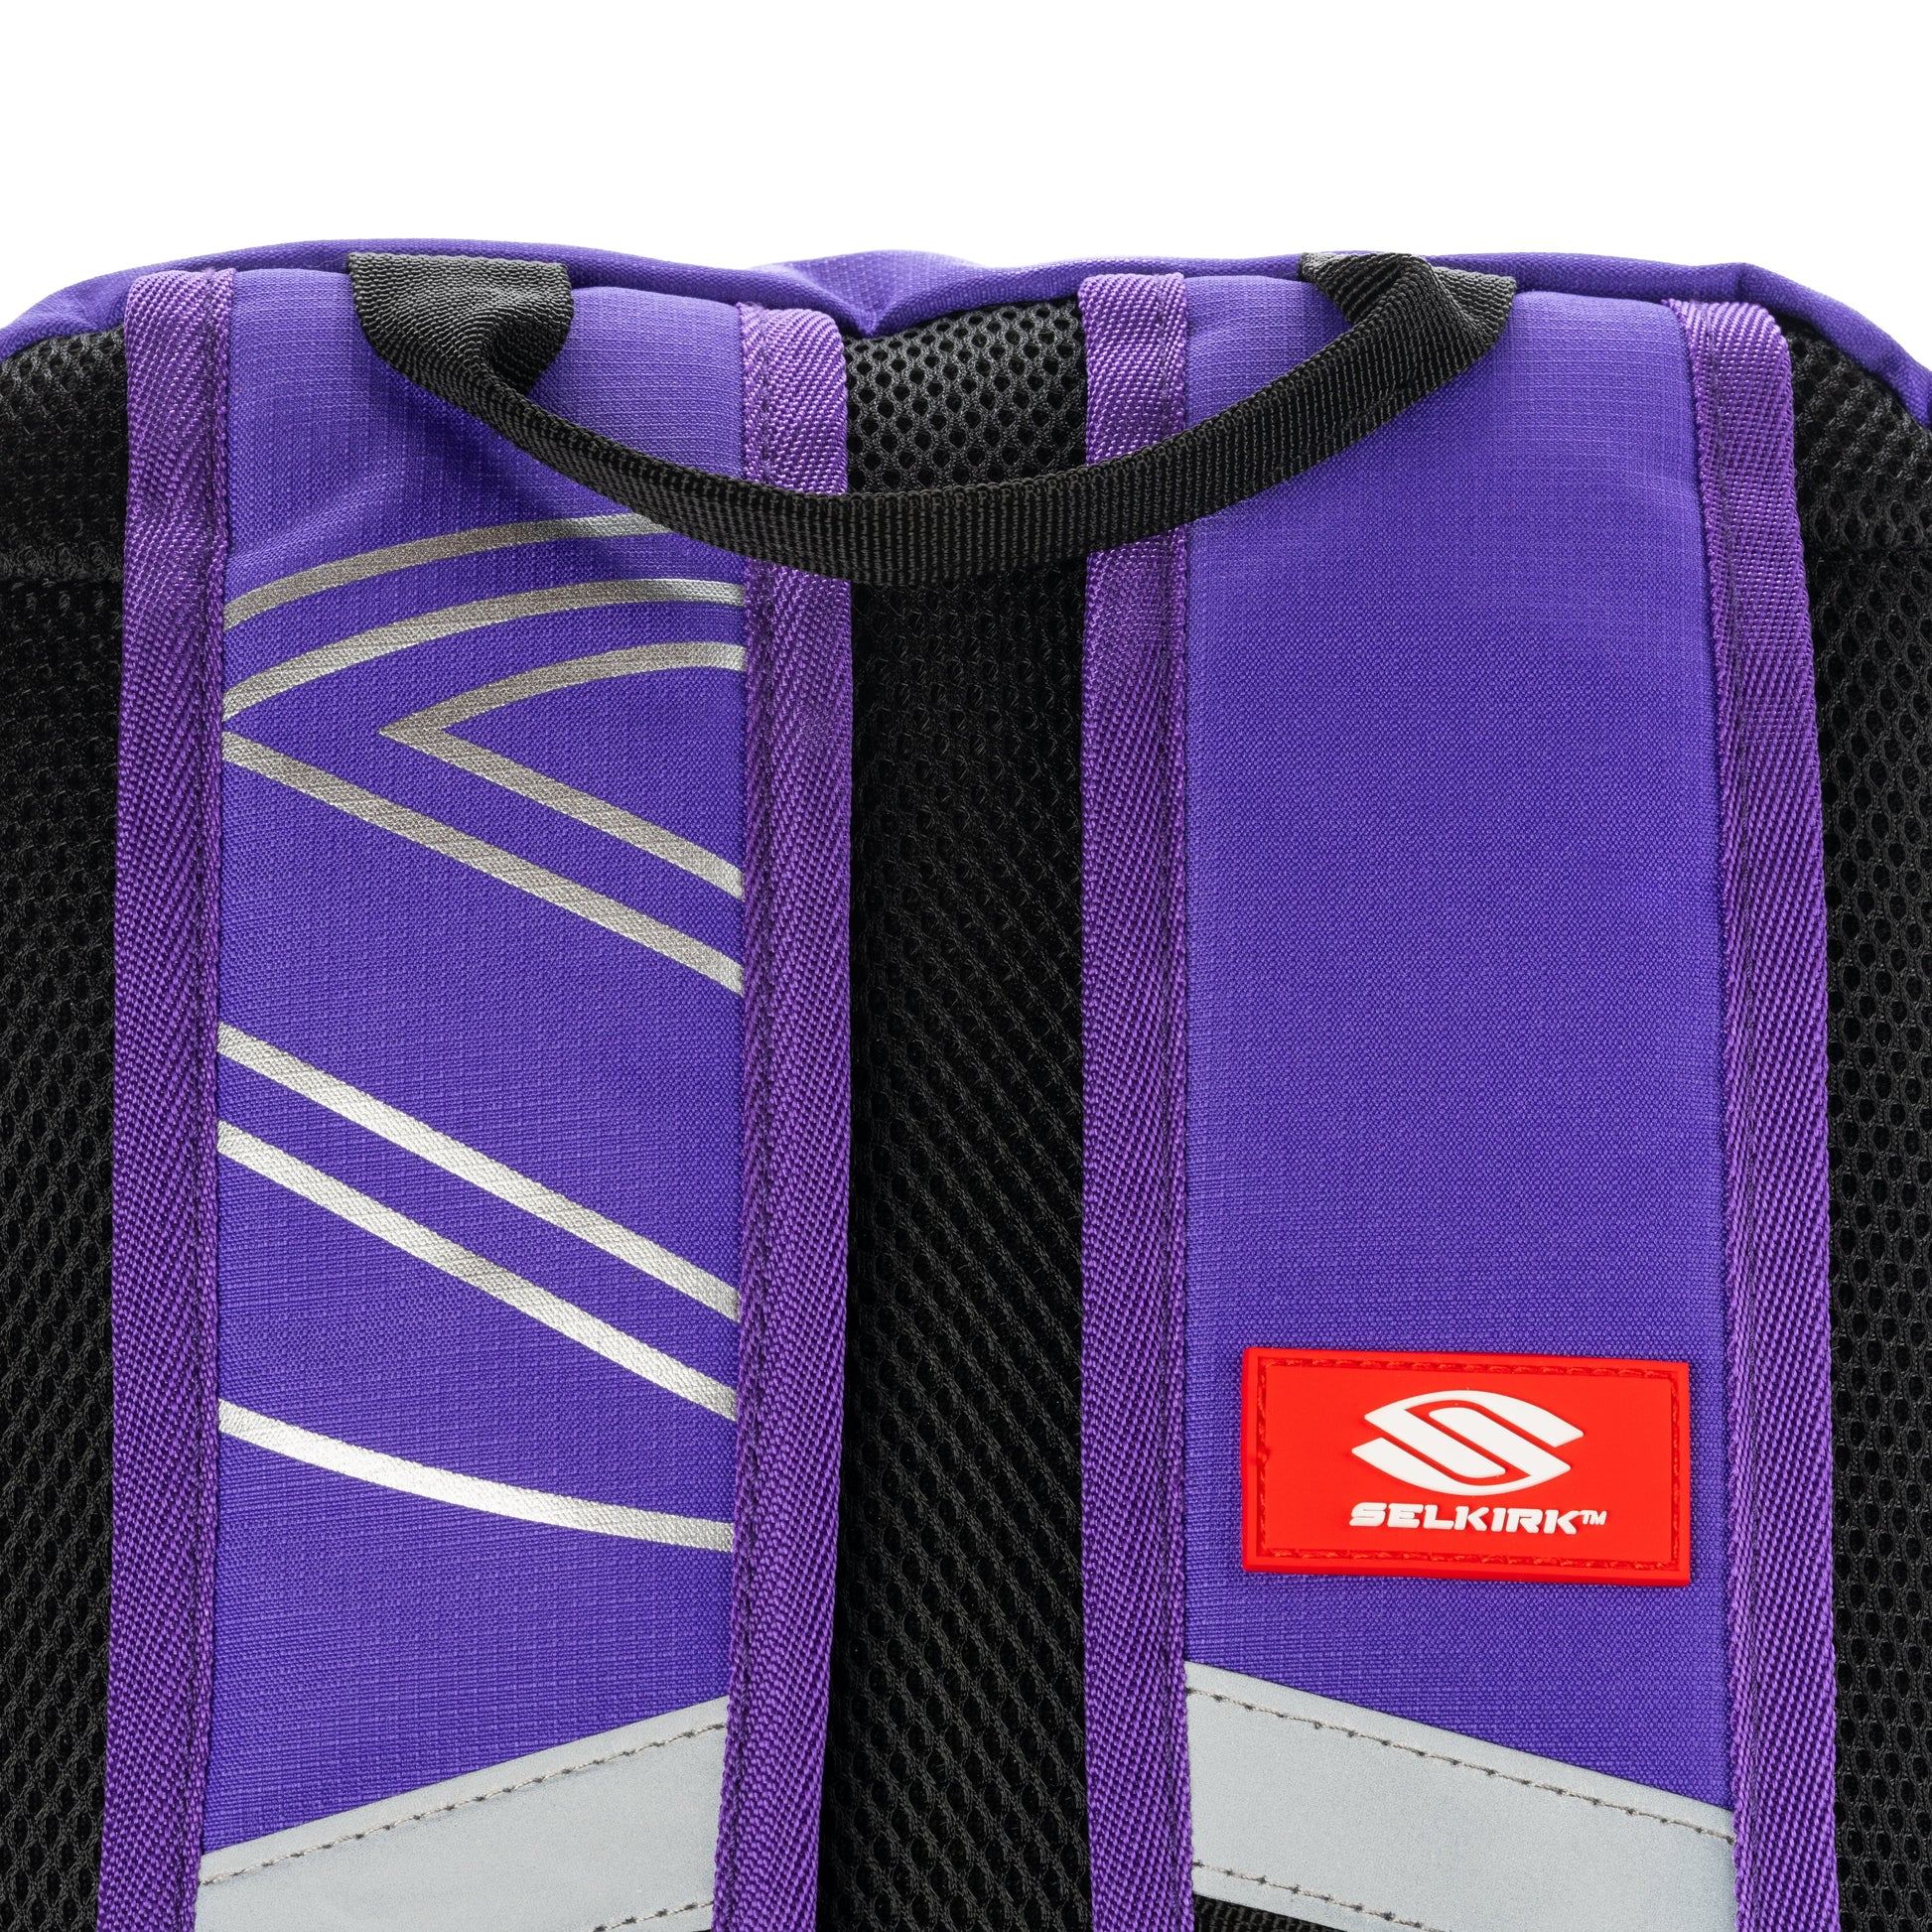 A Selkirk Core Series Day Backpack Pickleball Bag with a black and silver logo.